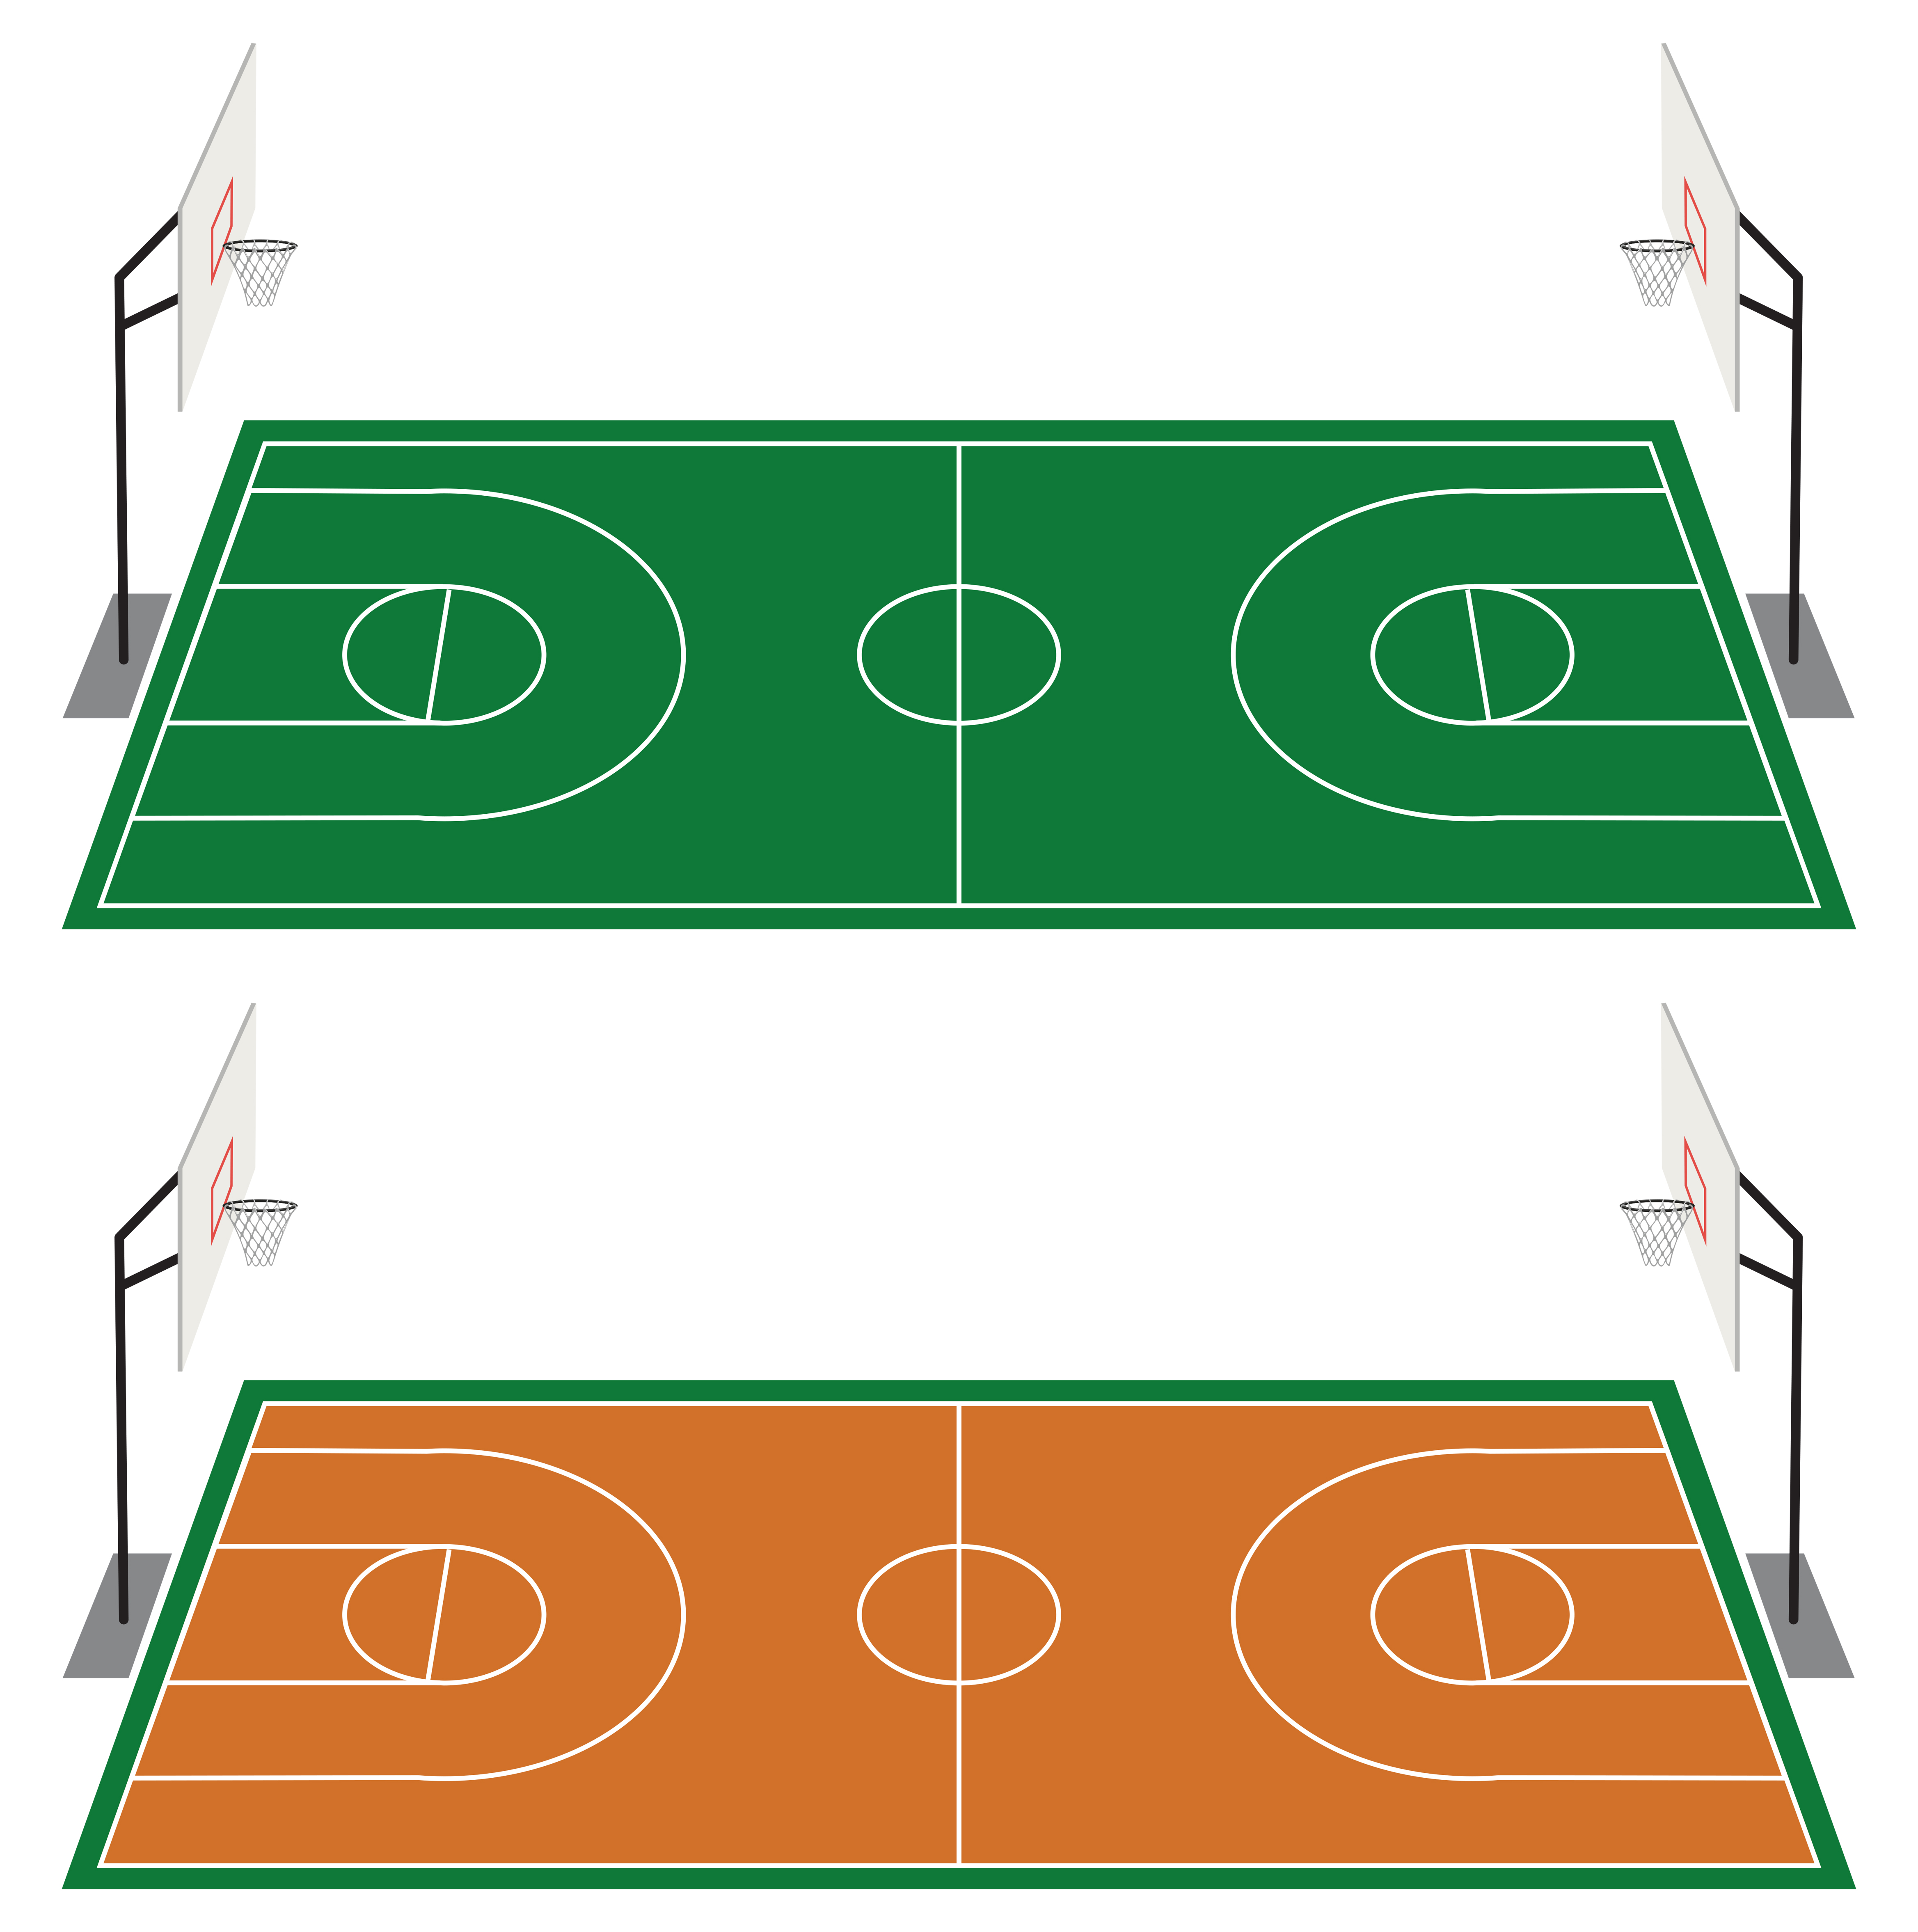 set-of-two-basketball-courts-541406-vector-art-at-vecteezy